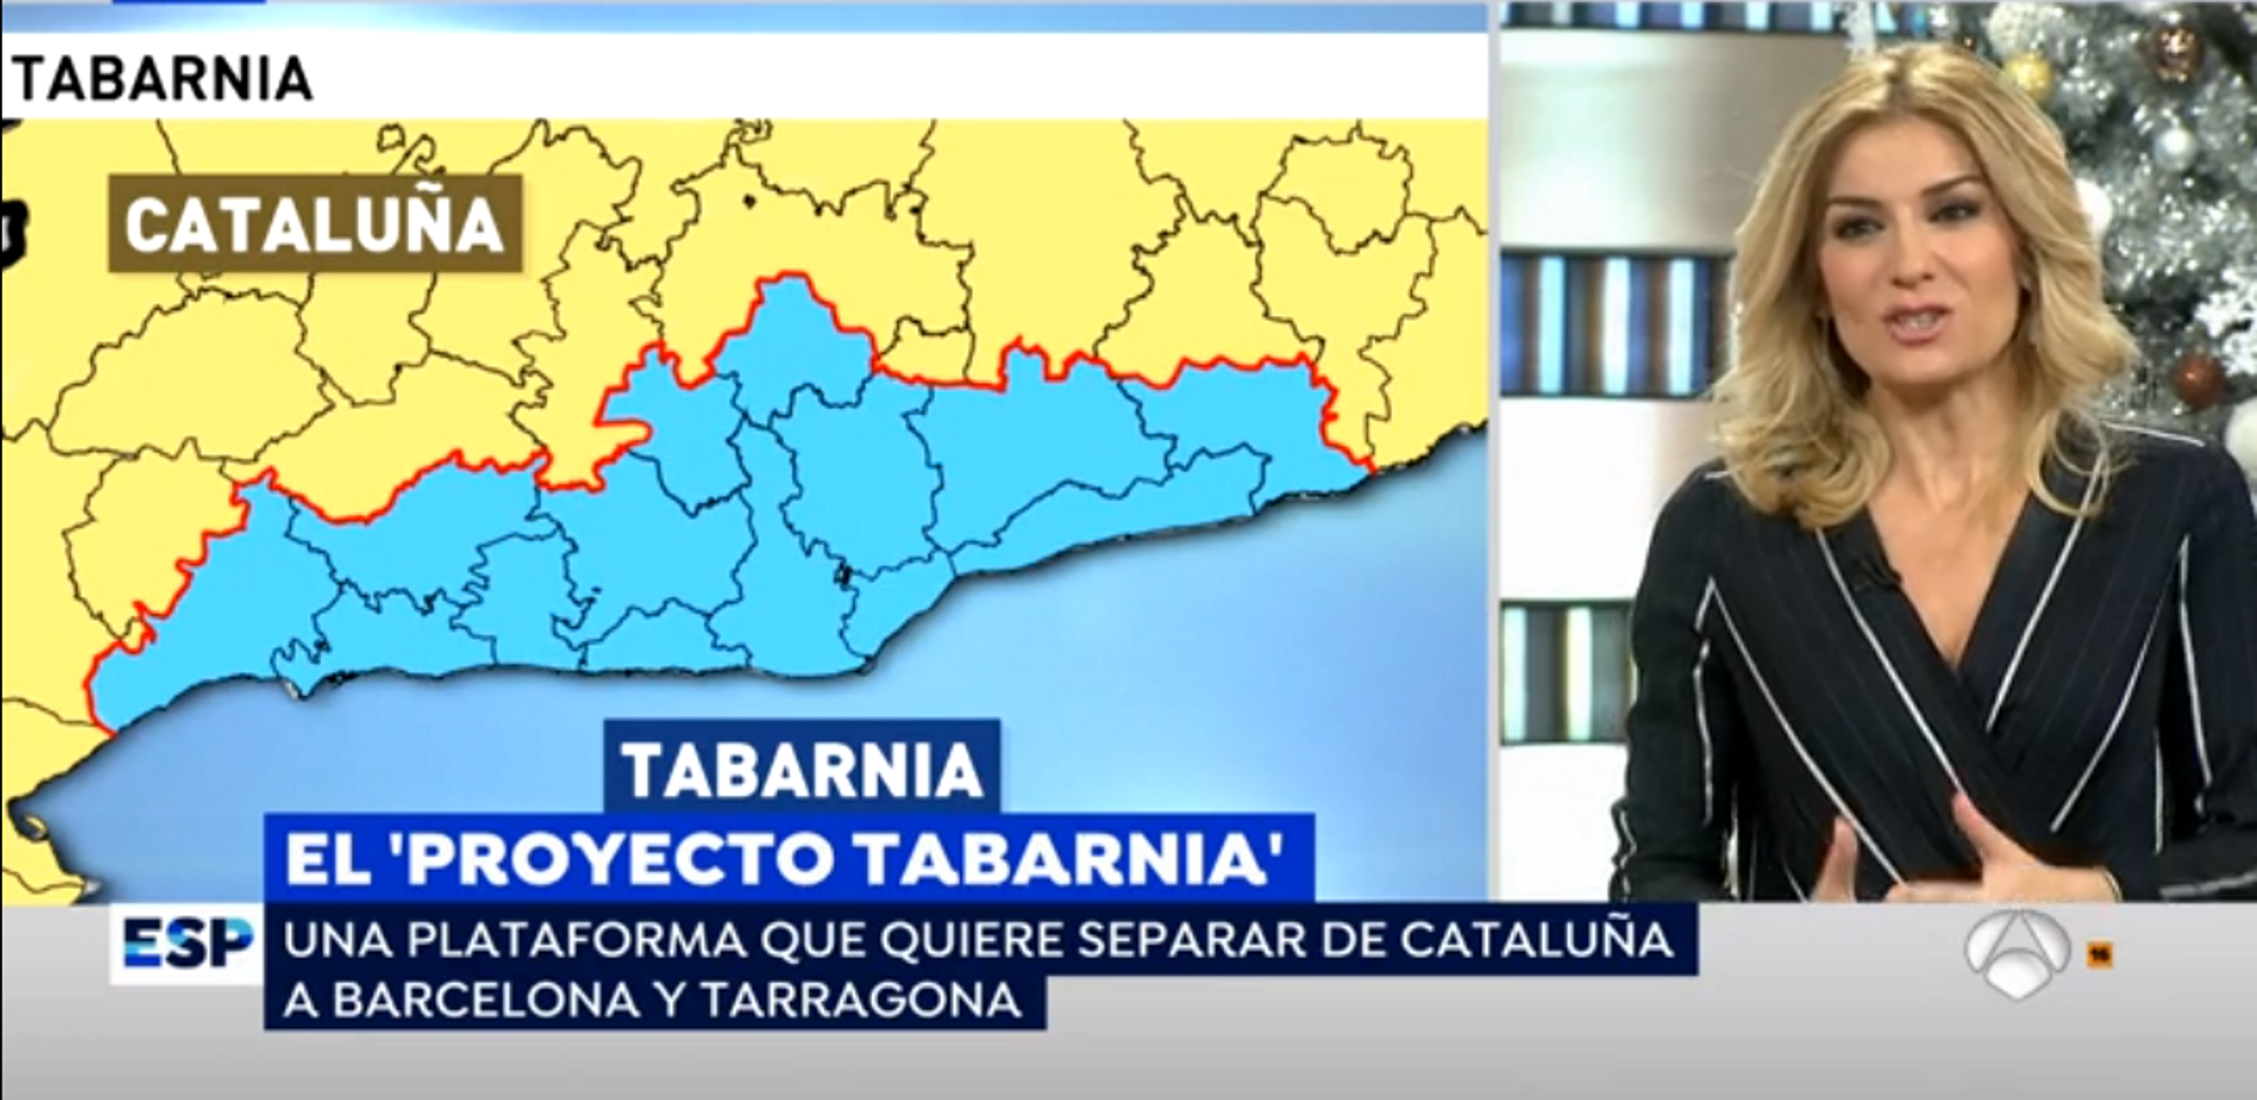 Unionists begin to say the Tabarnia joke isn't funny any more